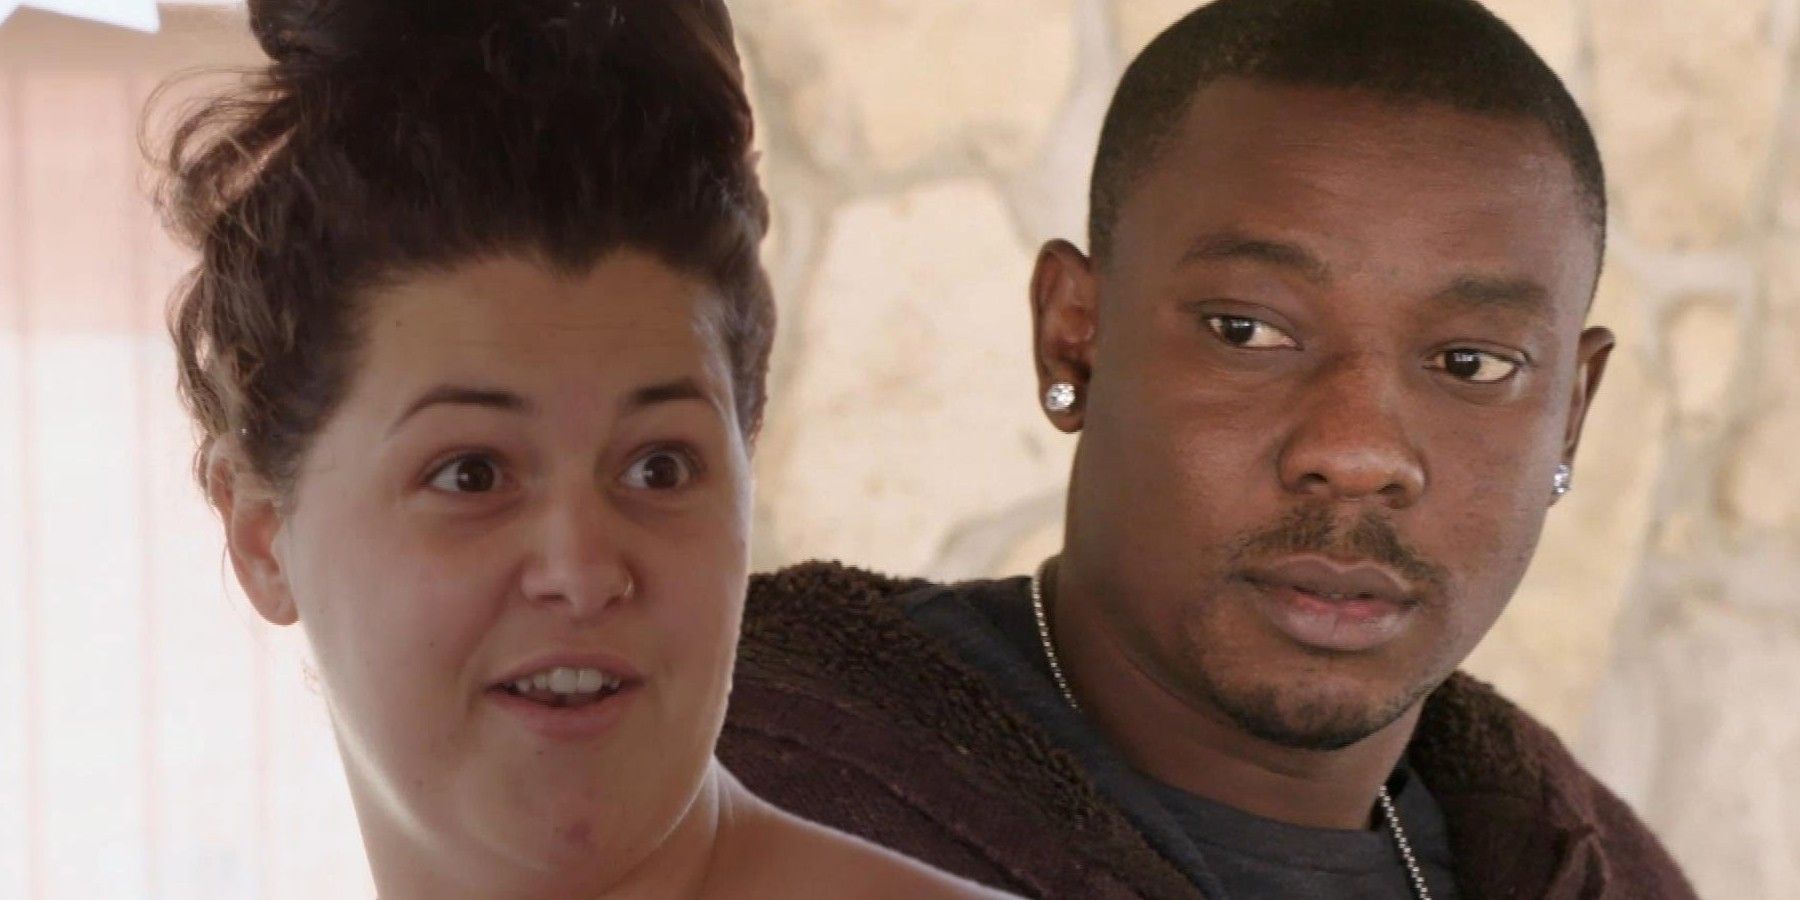 Kobe Blaise and Emily Bieberly from 90 Day Fiancé in side by side images looking surprised and serious